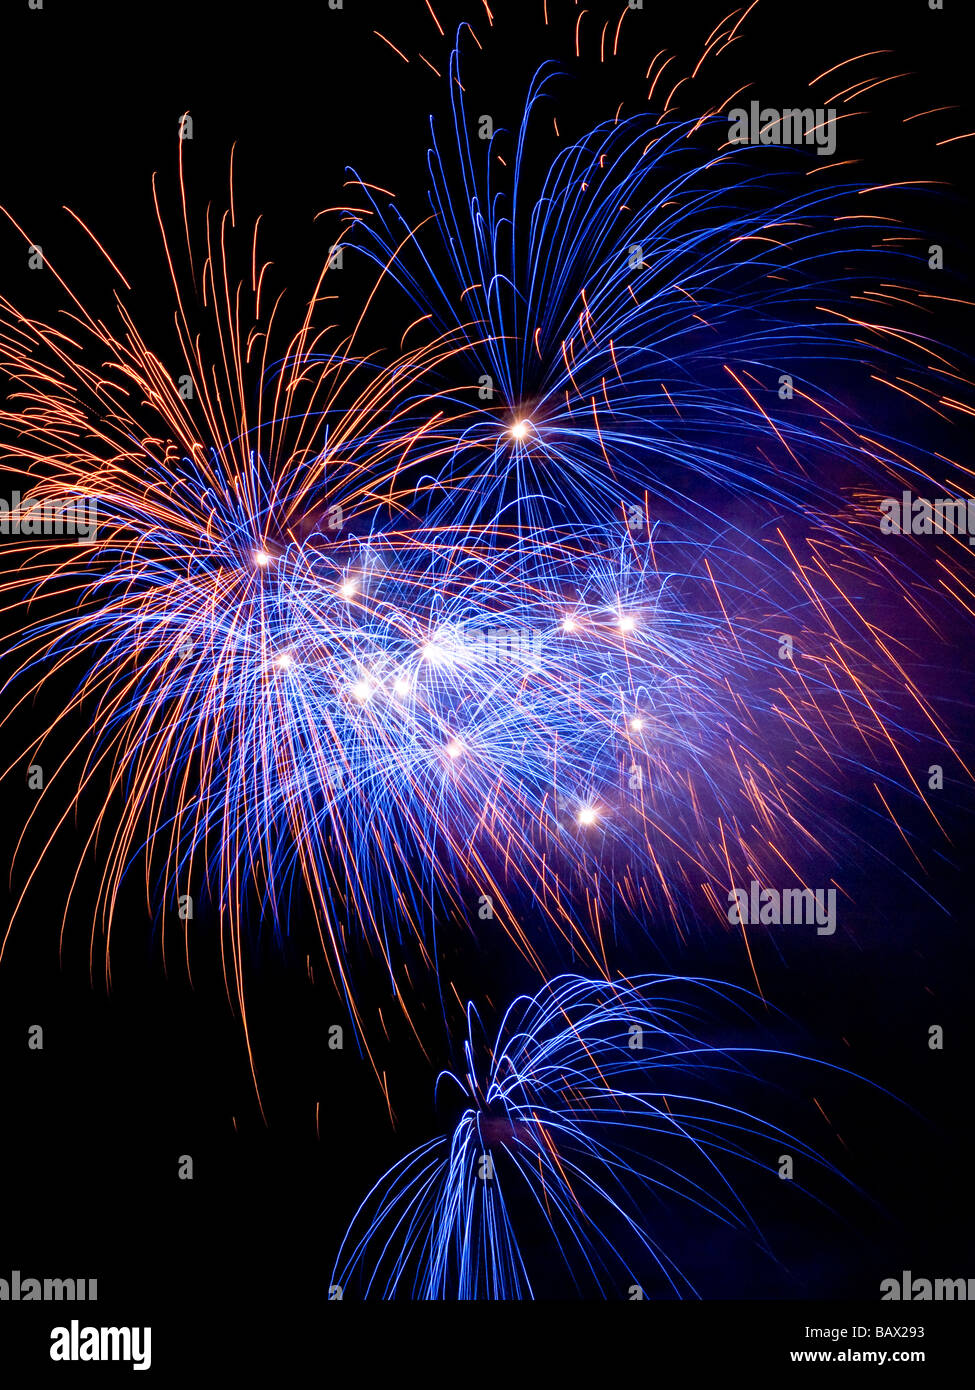 Colorful fireworks display over black sky Stock Photo